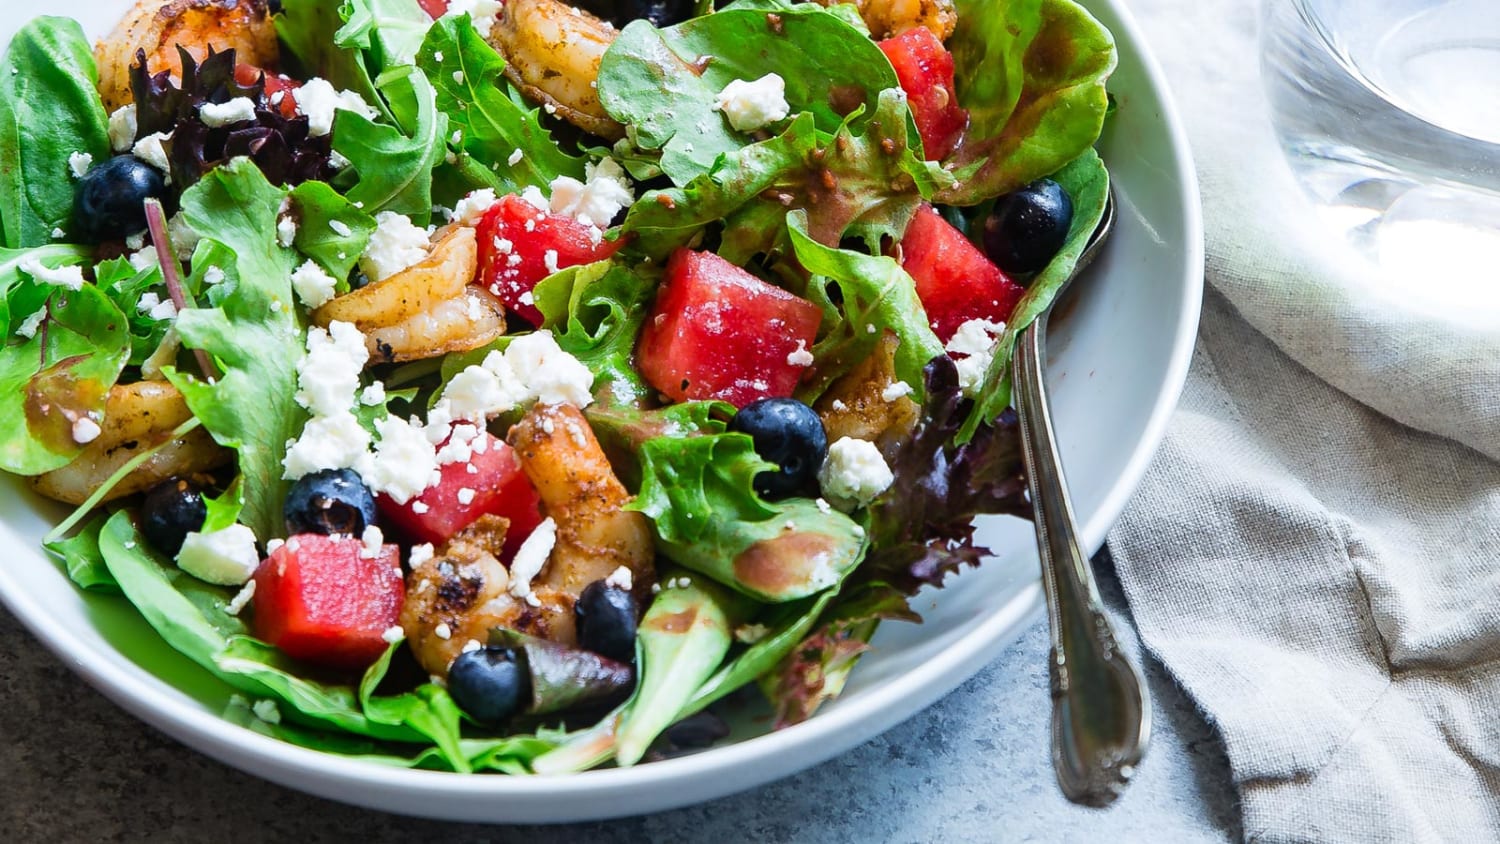 The 7 Best Healthy Summer Salad Recipes (To Eat Right Now)